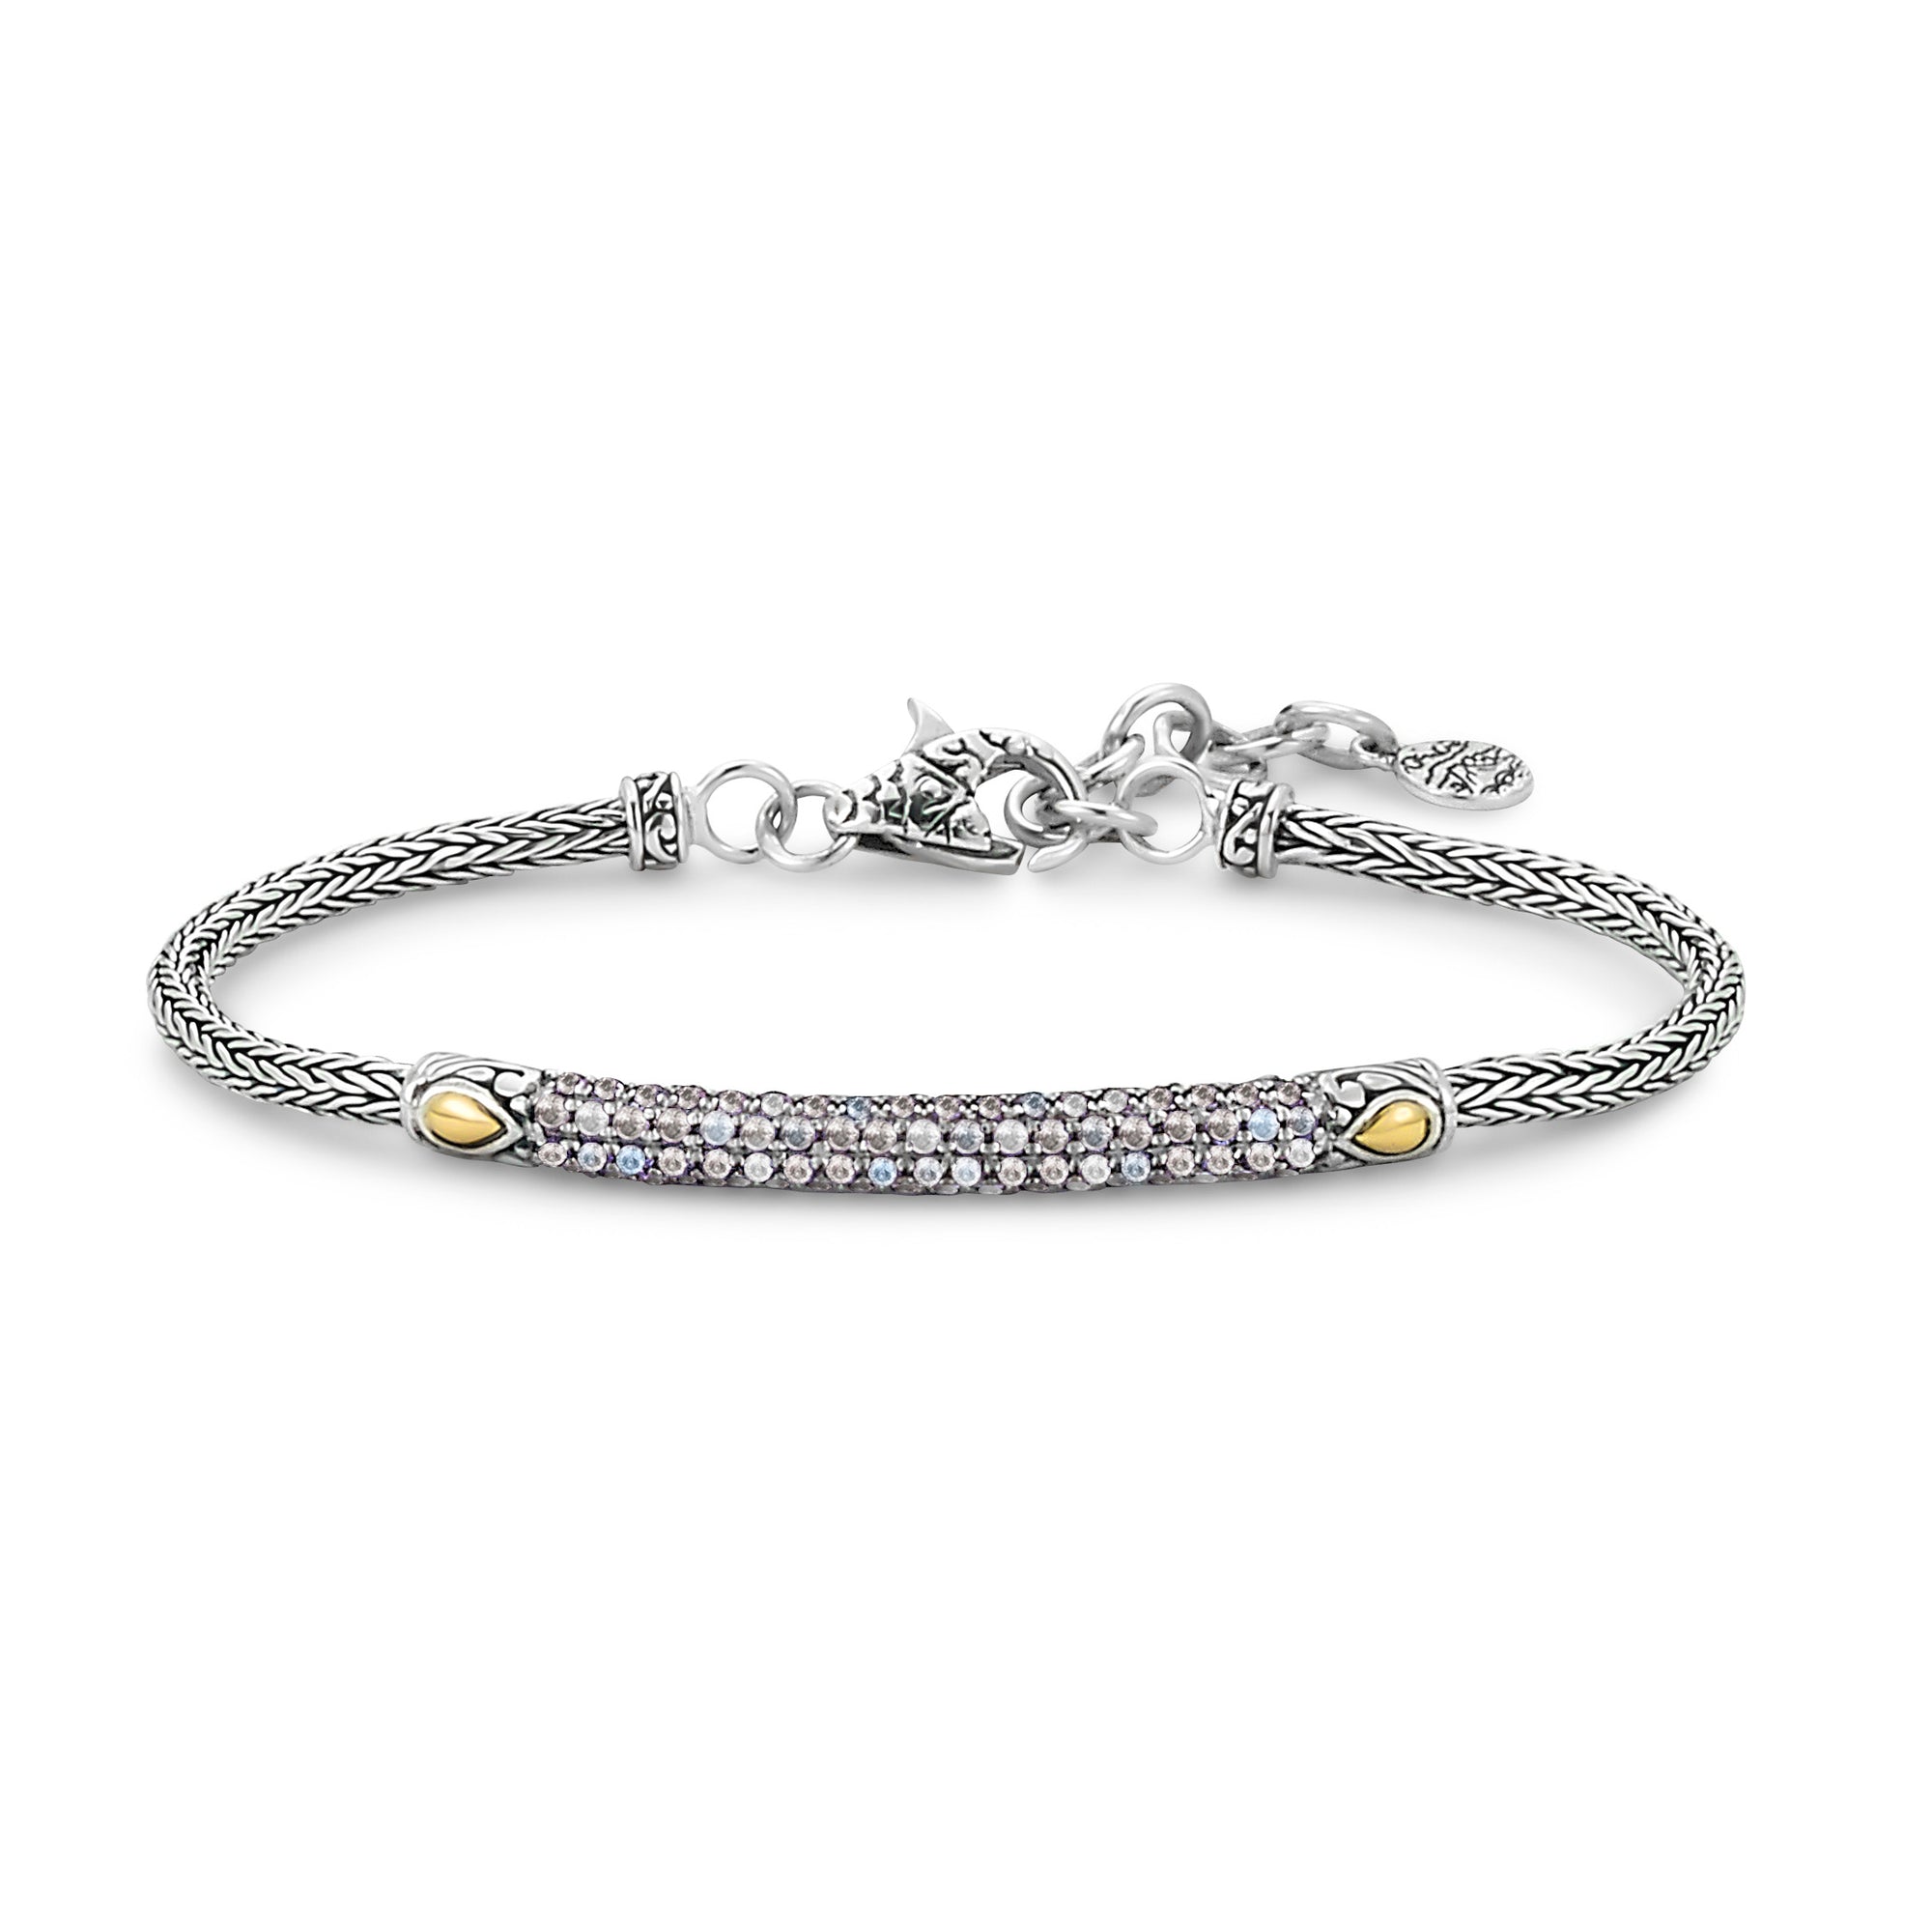 Rainbow Moonstone Glitter Bracelet available at Talisman Collection Fine Jewelers in El Dorado Hills, CA and online. Specs: Sterling Silver, 18k gold, pave rainbow moonstone.